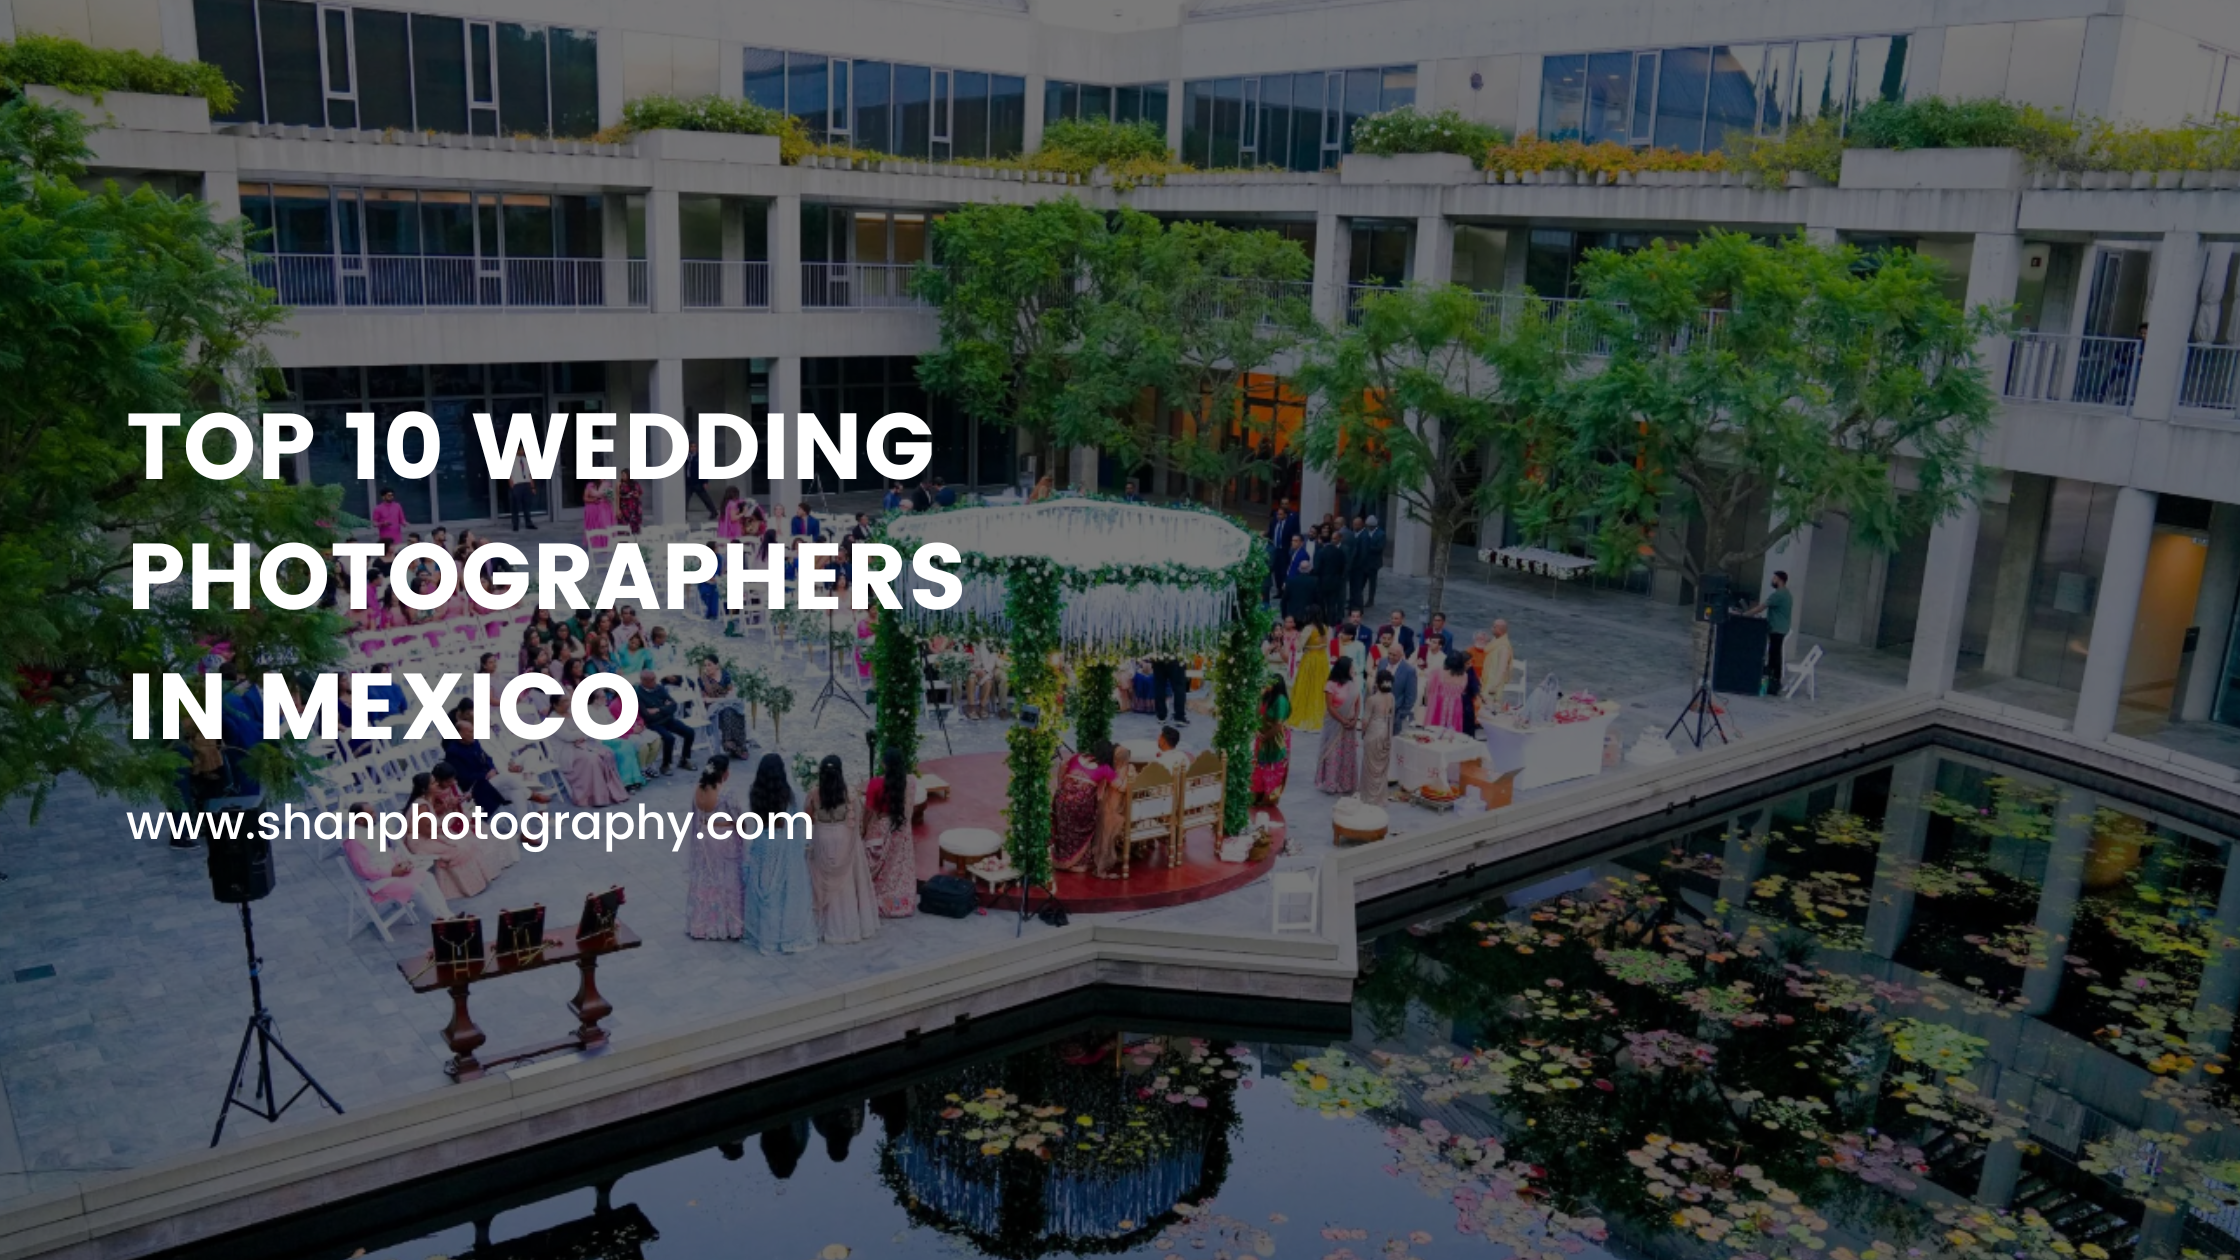 Top 10 Wedding Photographers in Mexico